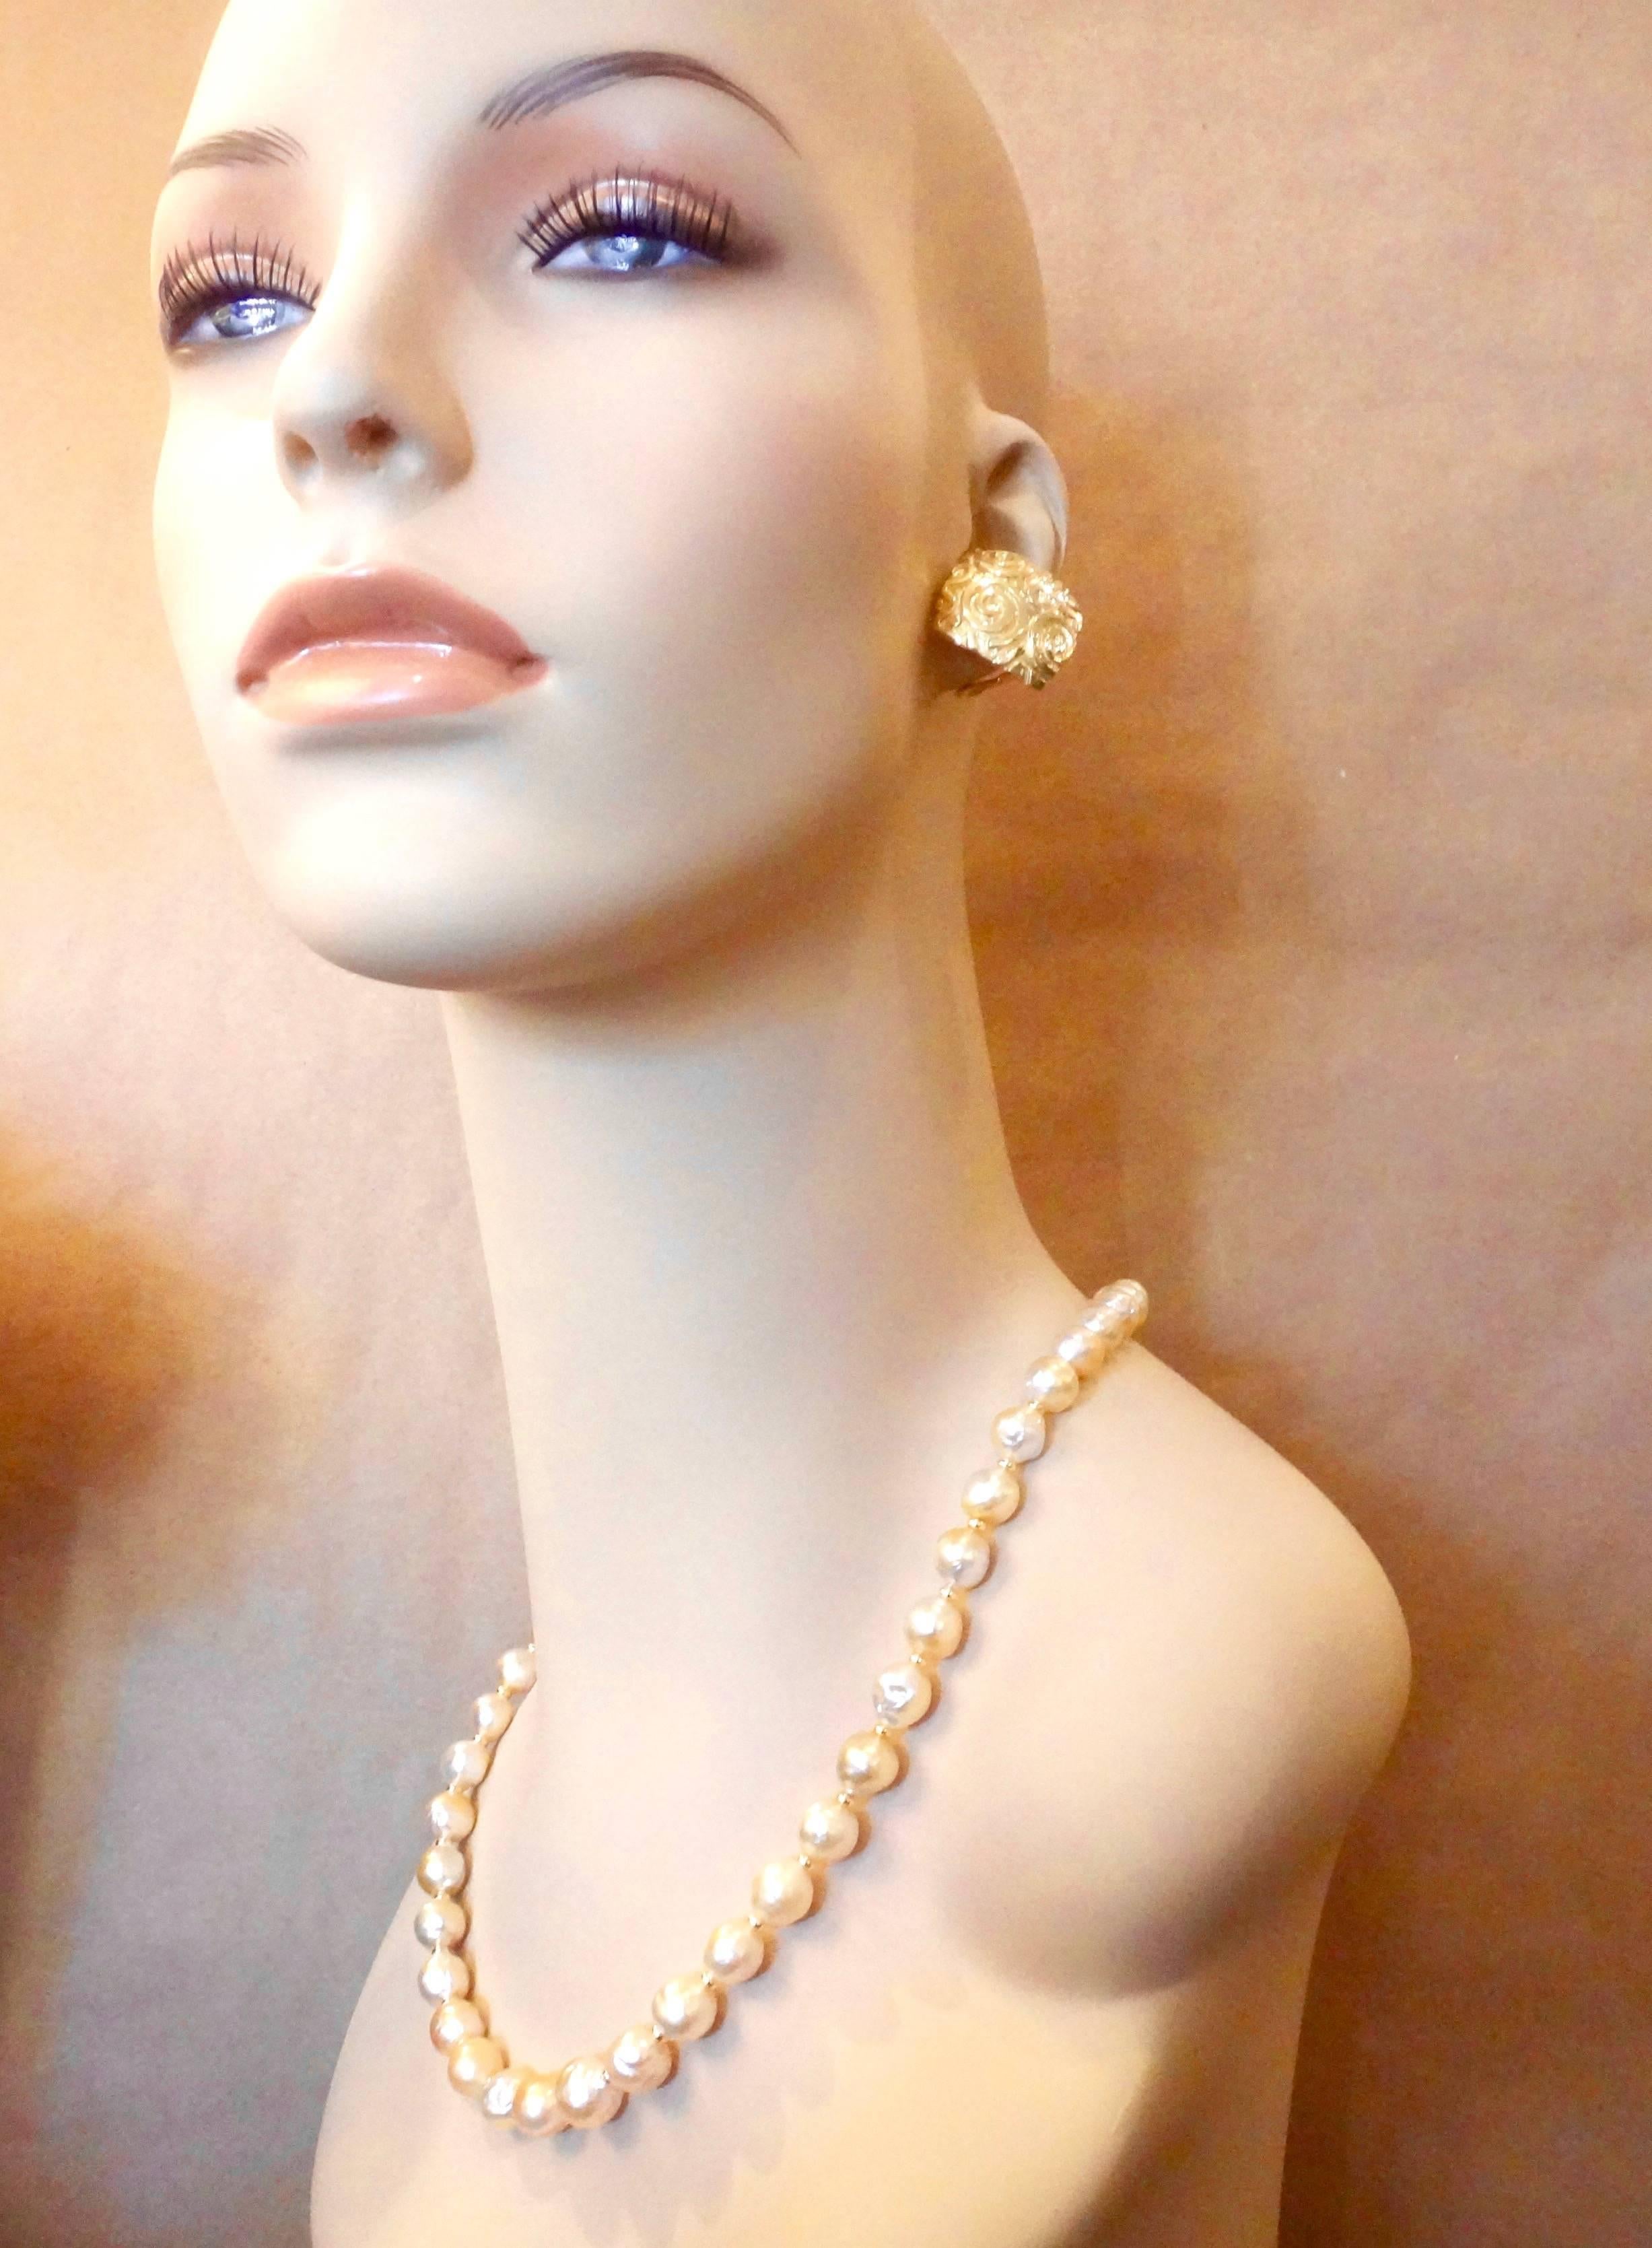 Forty baroque Golden Indonesian pearls make up this stunning necklace.  The pearls possess great color and luster .  They range in size from 9mm to 11mm with a finished length of 20 inches.  The pearls a spaced with small gold rondelles and the